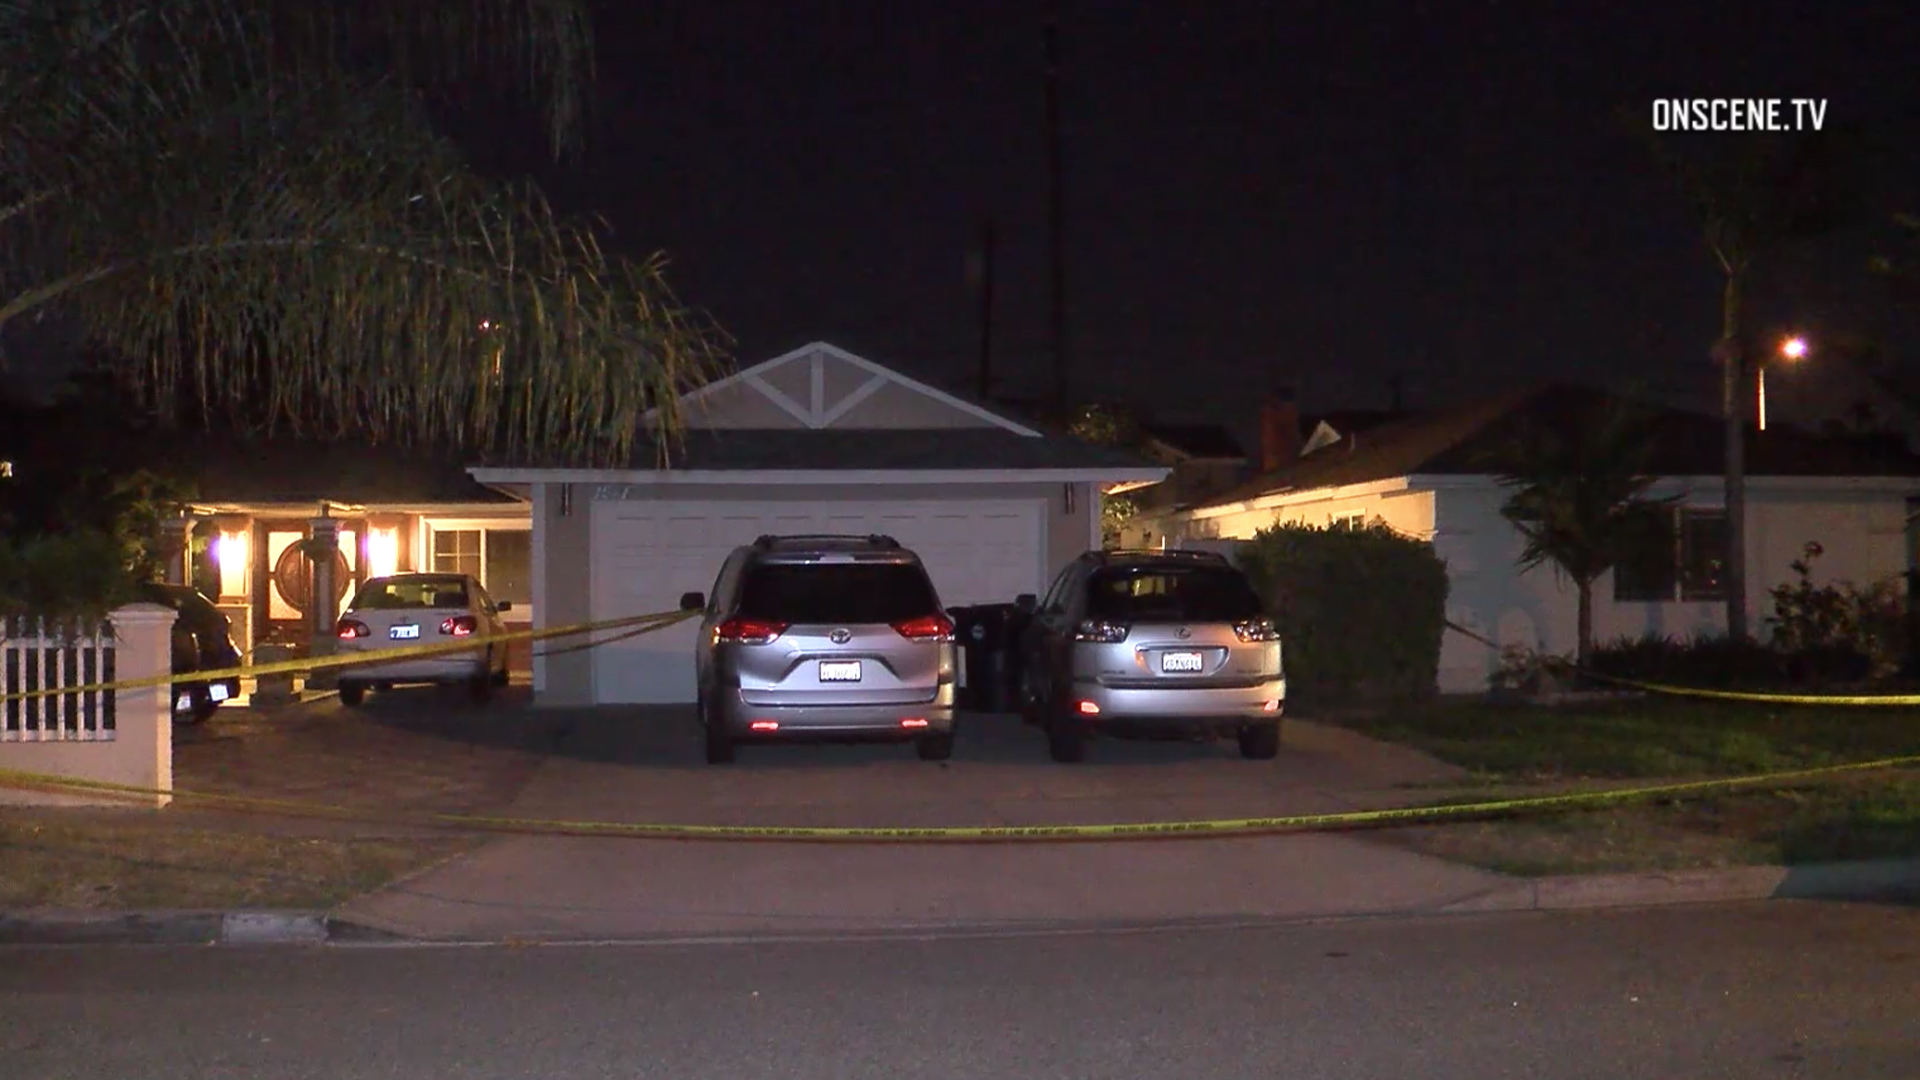 Police tape surrounds a house in Westminster where a baby was found unresponsive and died on Dec. 12, 2017. The infant's mother was arrested on suspicion of homicide. (Credit: OnScene.TV)